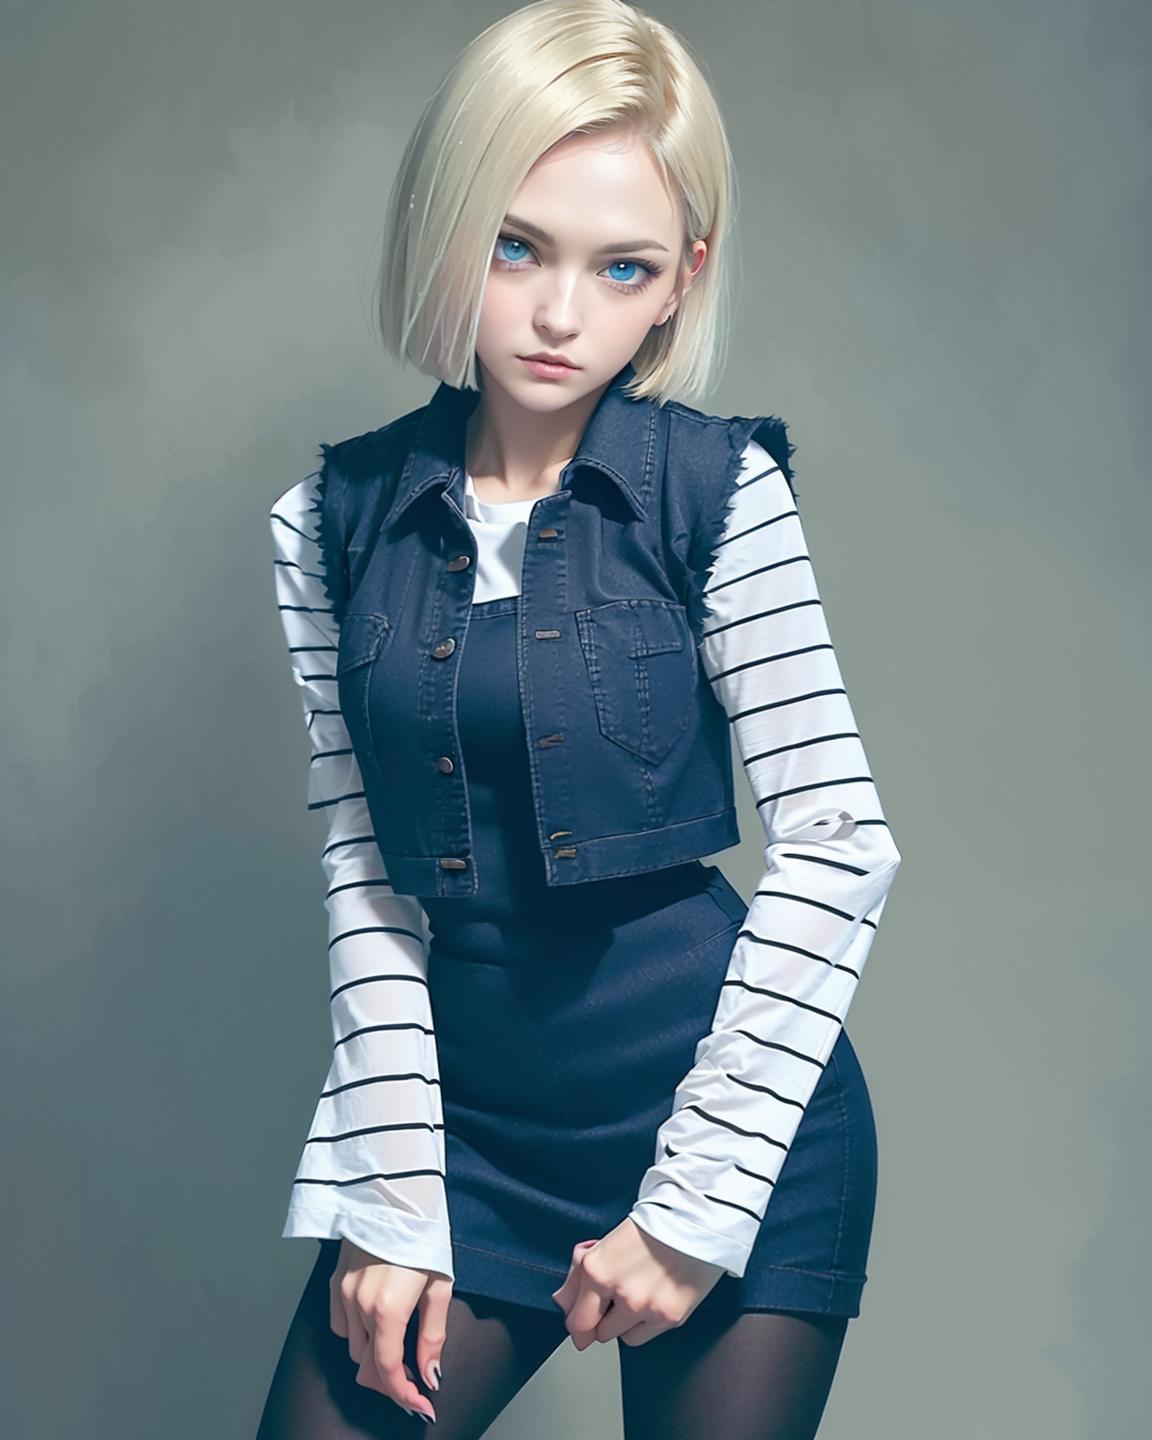 Android 18 人造人間18号 / Dragon Ball Z image by MrHong